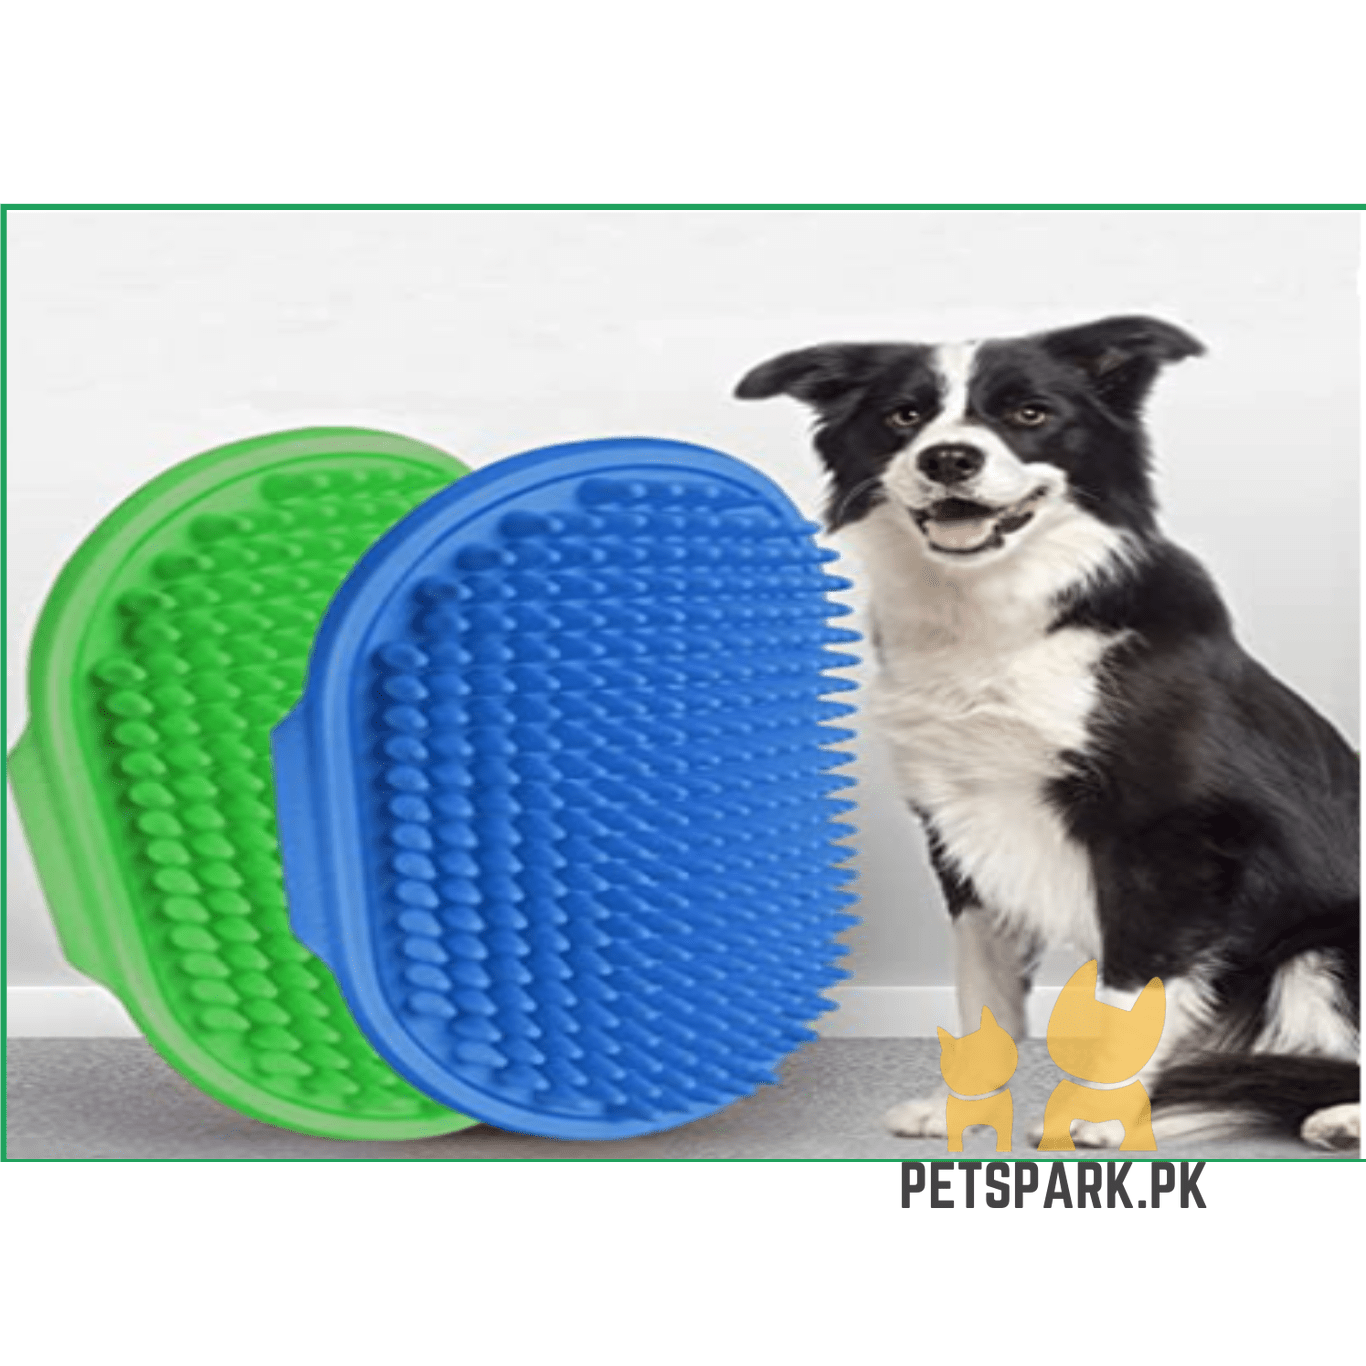 Hand Grooming Silicon Brush for Cats and Dogs pets-park-pk